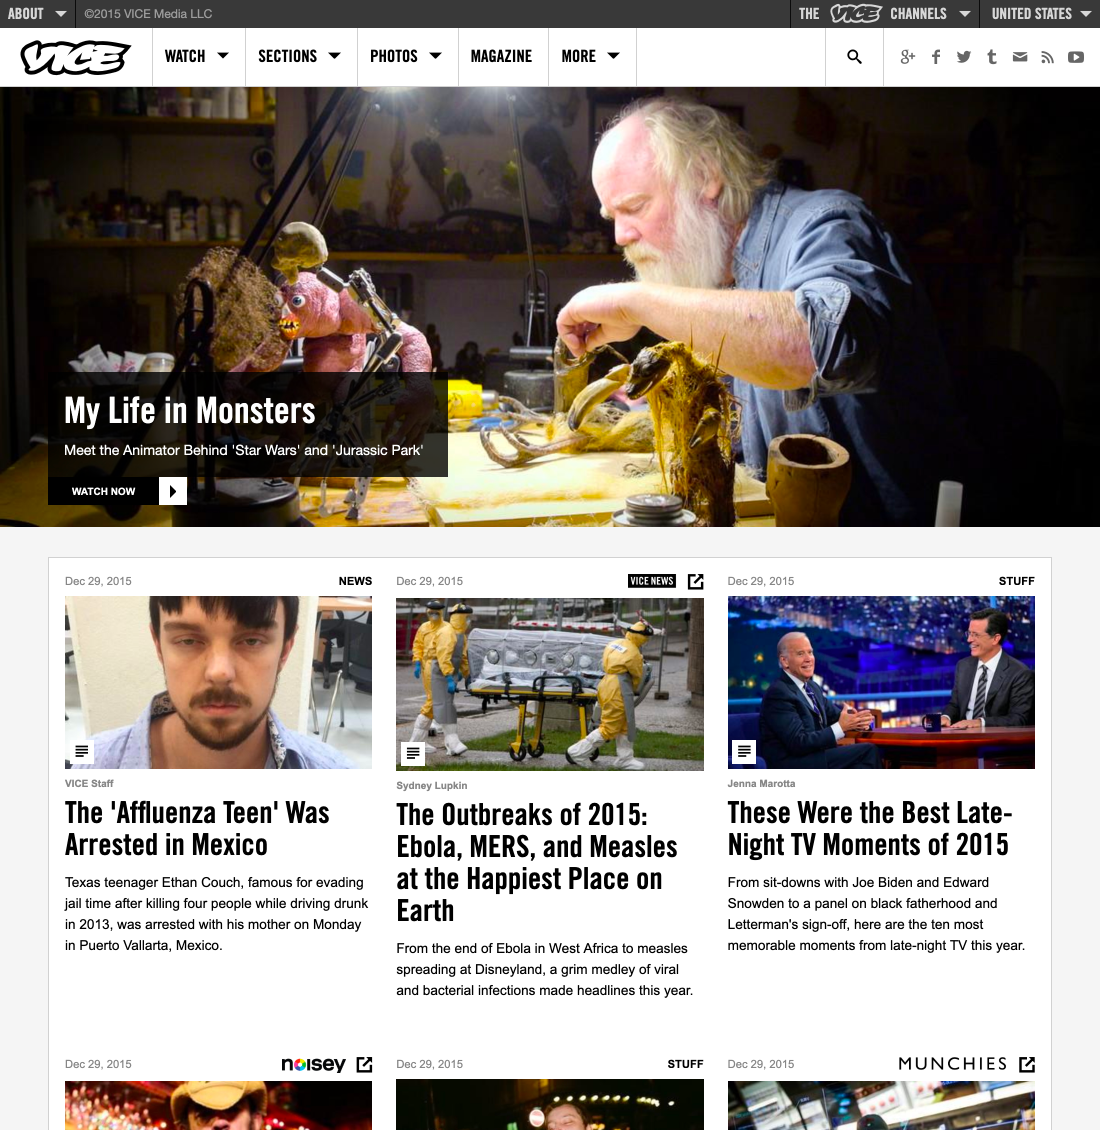 VICE's homepage in 2015